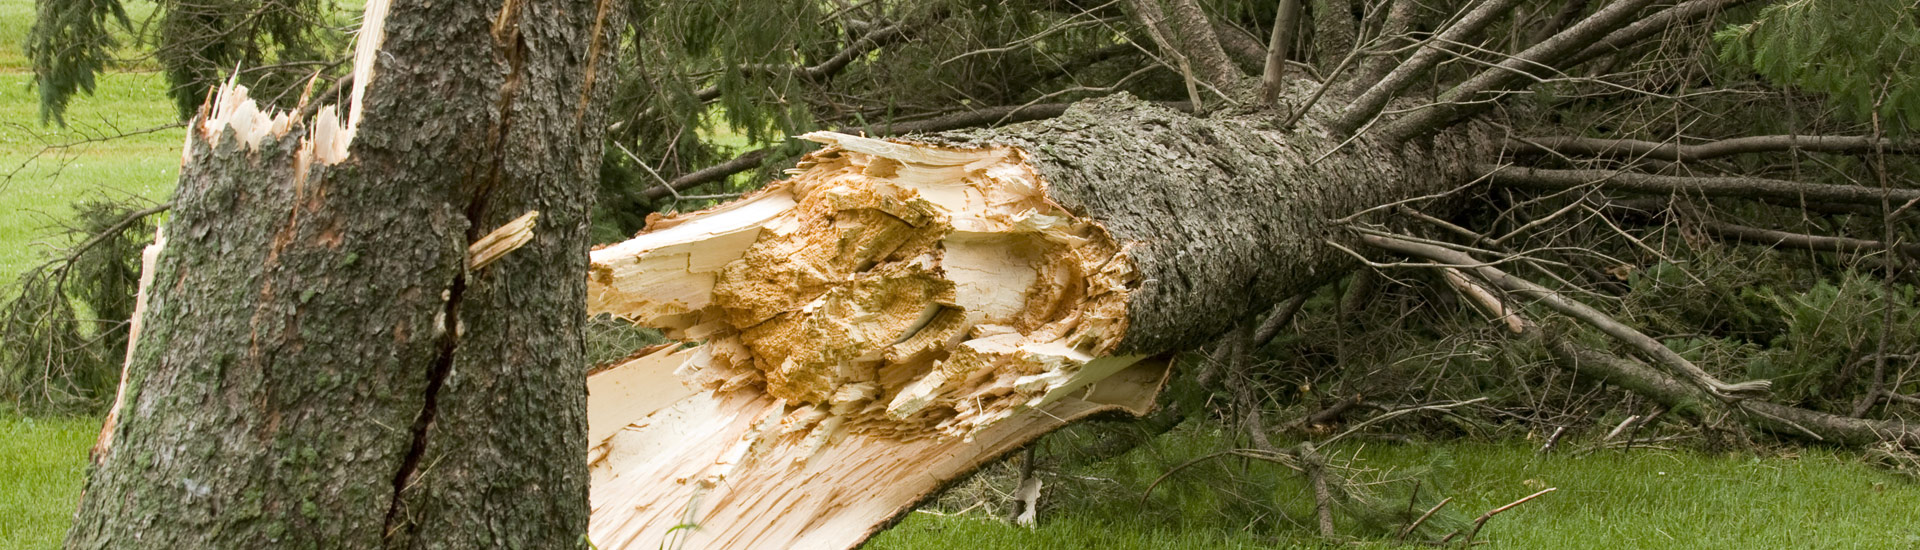 Tree Damaged by Storm